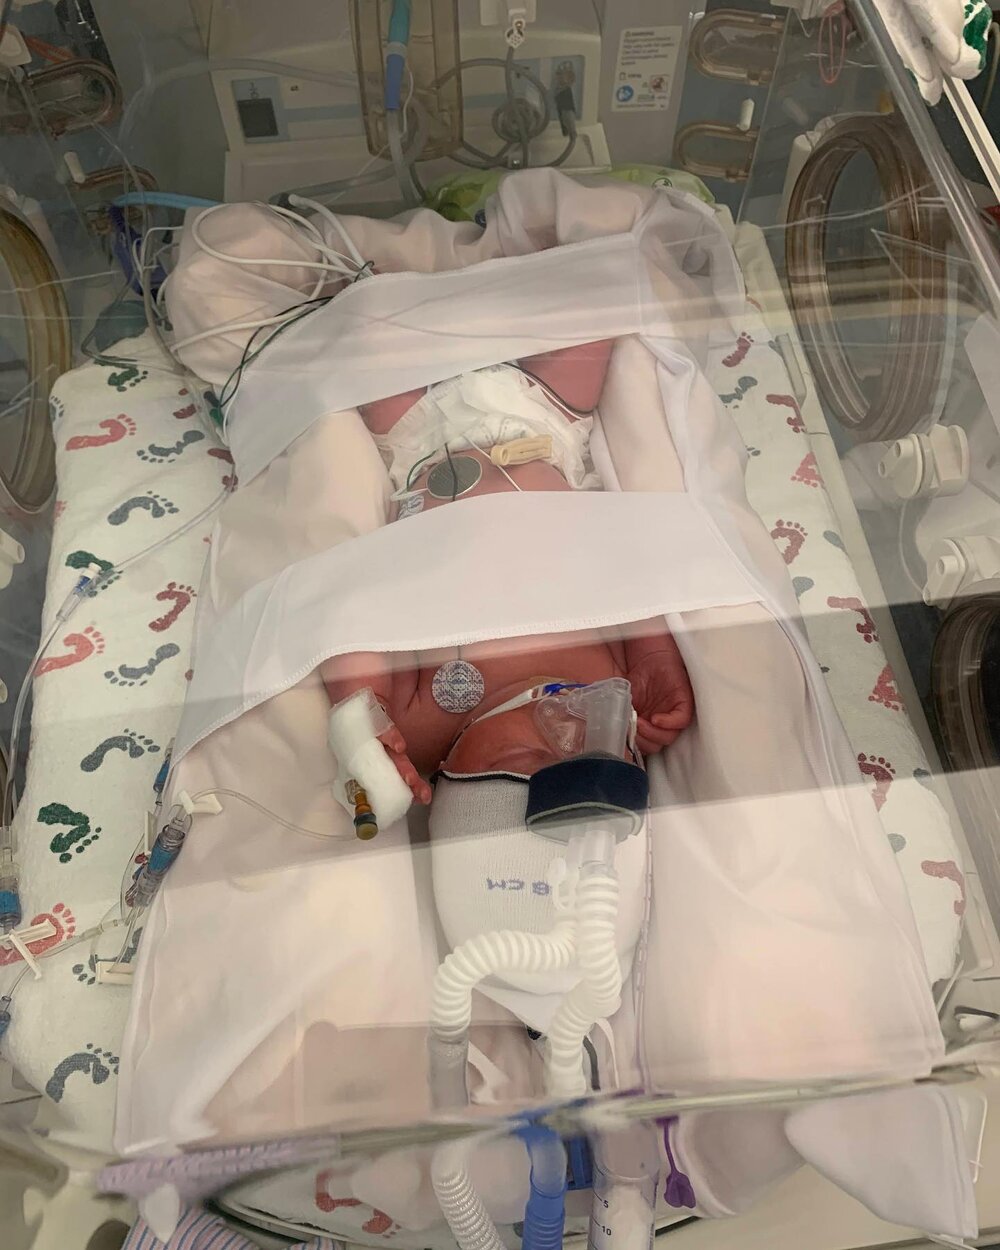 World Prematurity Day with our sweet preemie! 💙

Born at 32 weeks, our William was unable to breathe on his own, regulate his body temperature, or eat on his own. Our little NICU graduate conquered all of those skills in about 30 days! 

Now, he&rsq